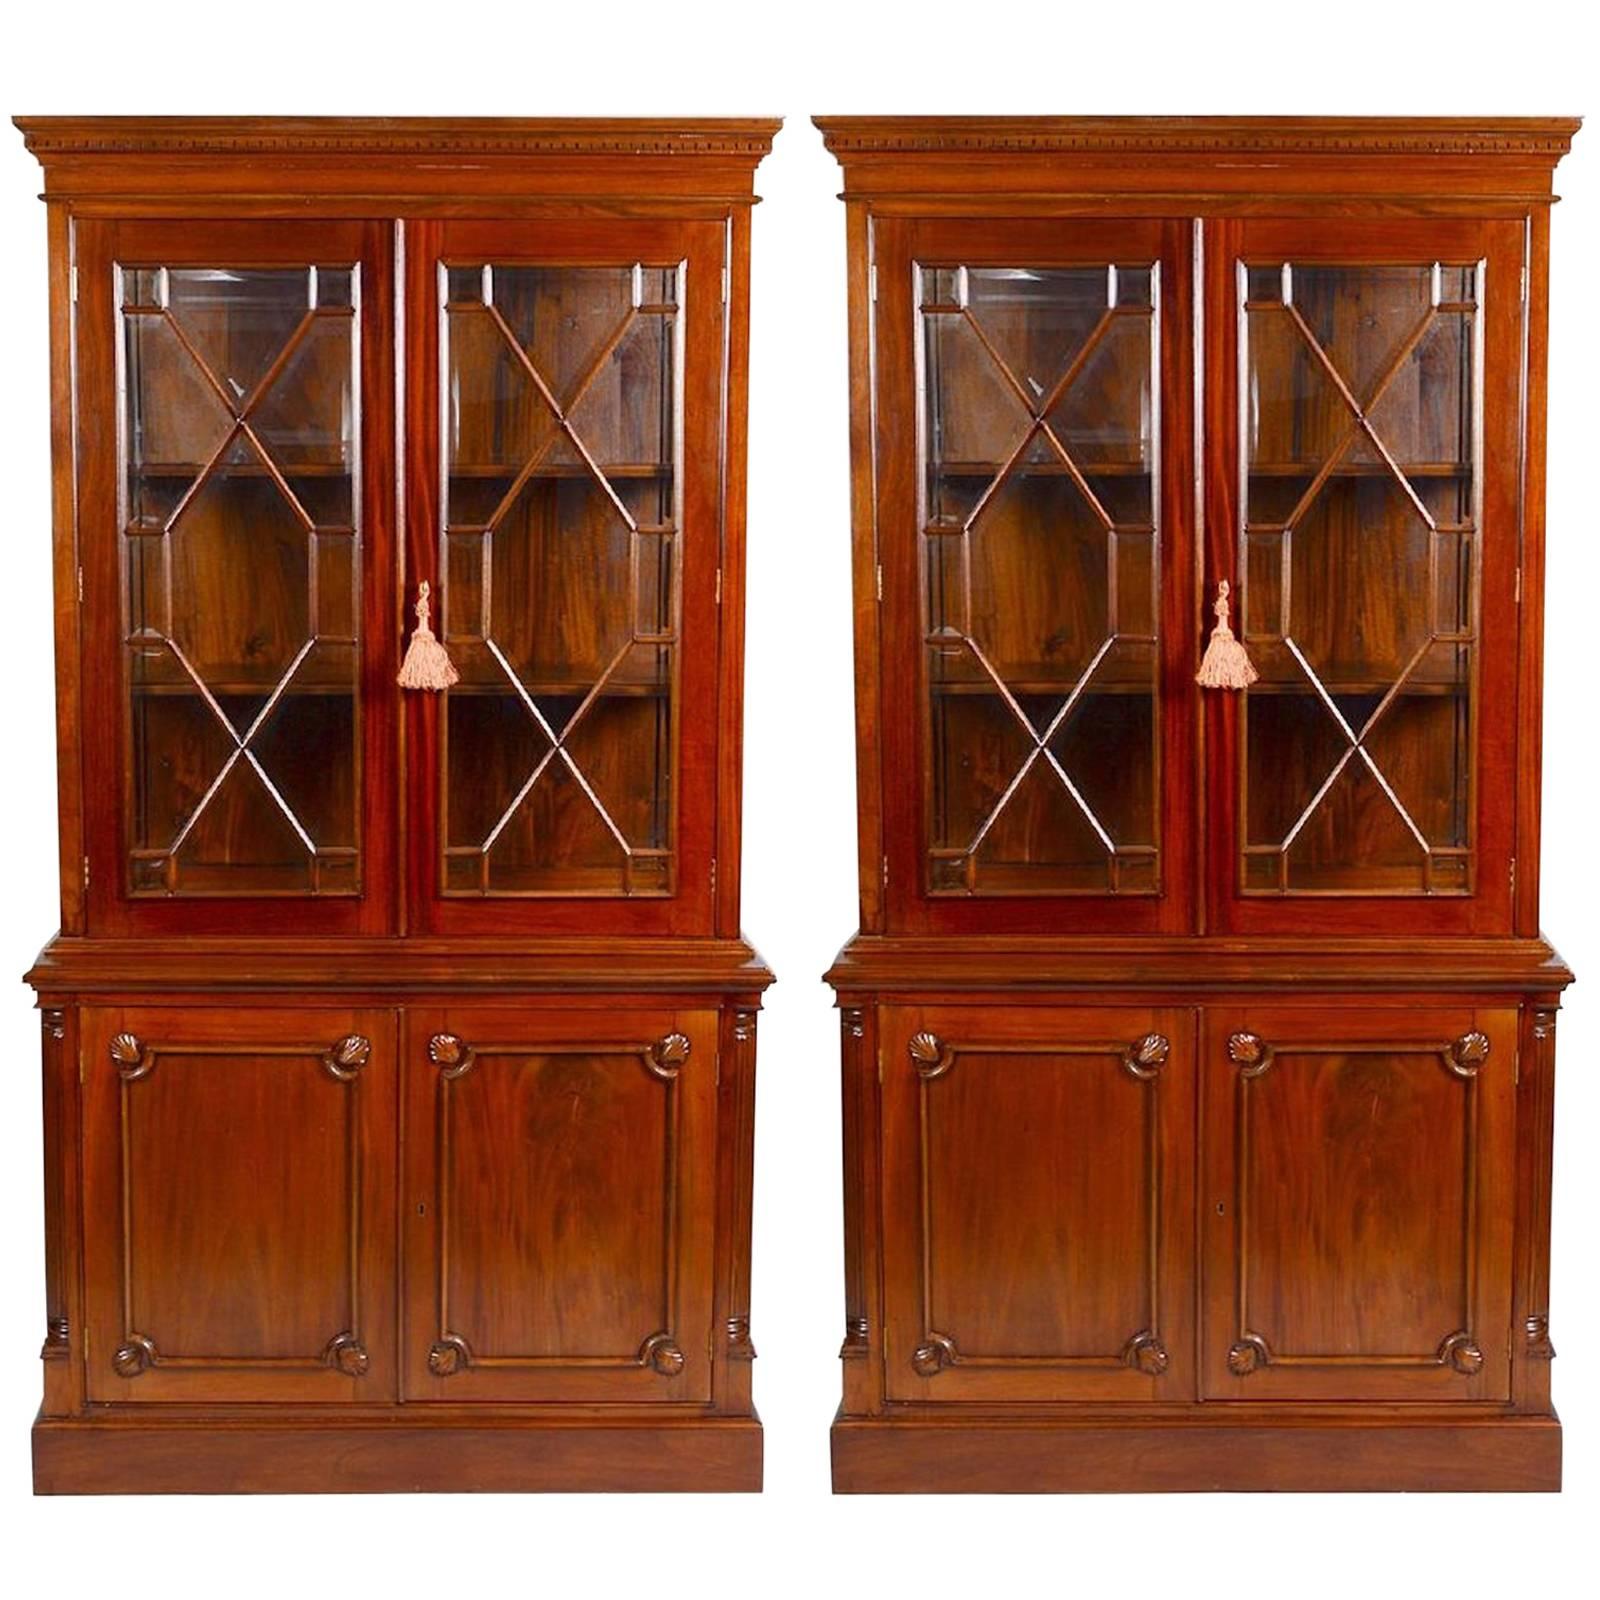 Pair of English Georgian Style Mahogany Bookcases or Breakfronts